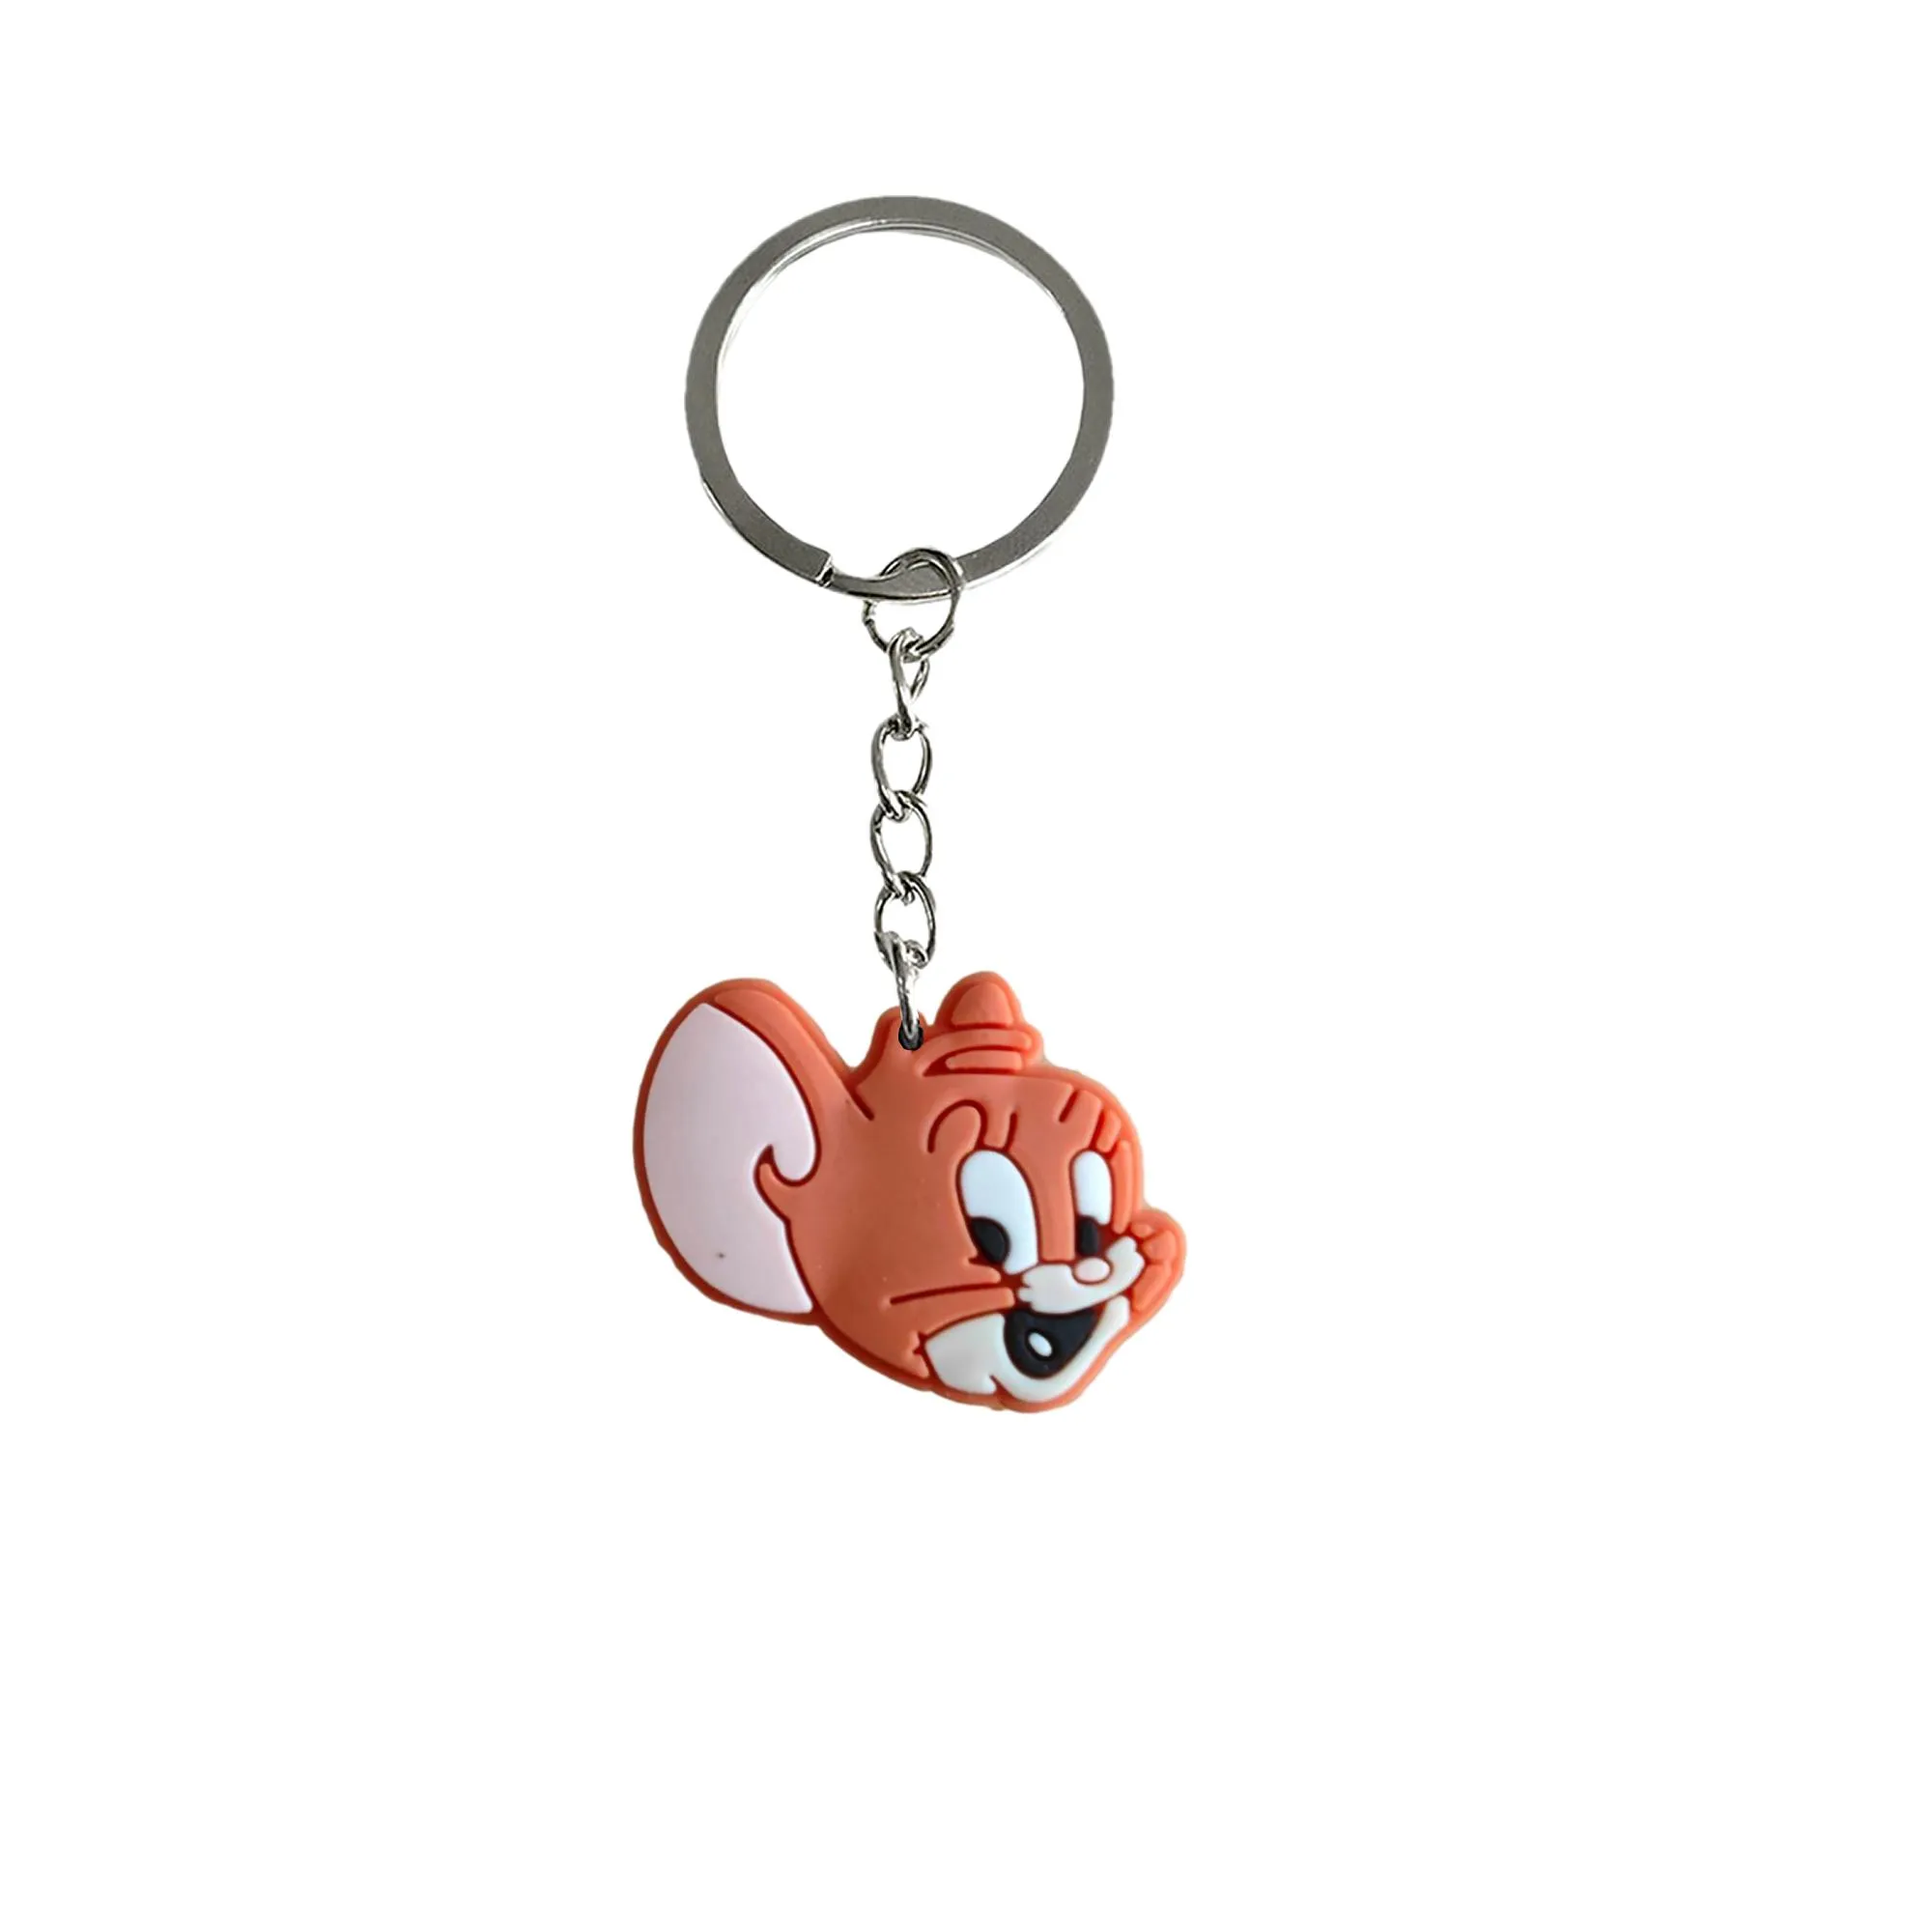 cats and mice keychain for kids party favors keychains girls backpack shoulder bag pendant accessories charm keyring suitable schoolbag key chain kid boy girl gift men